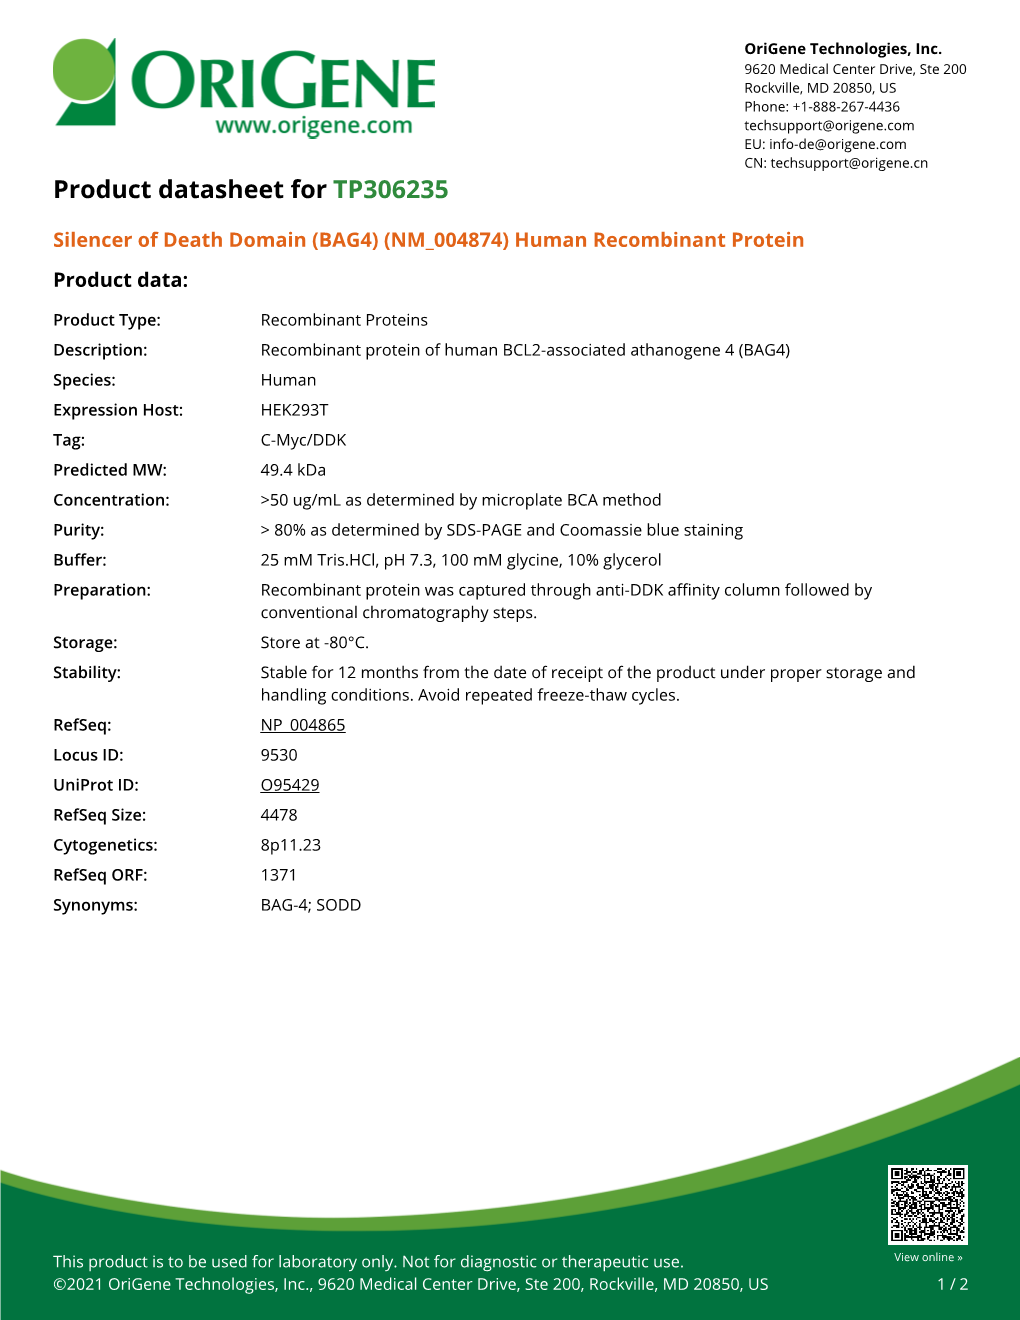 Silencer of Death Domain (BAG4) (NM 004874) Human Recombinant Protein Product Data